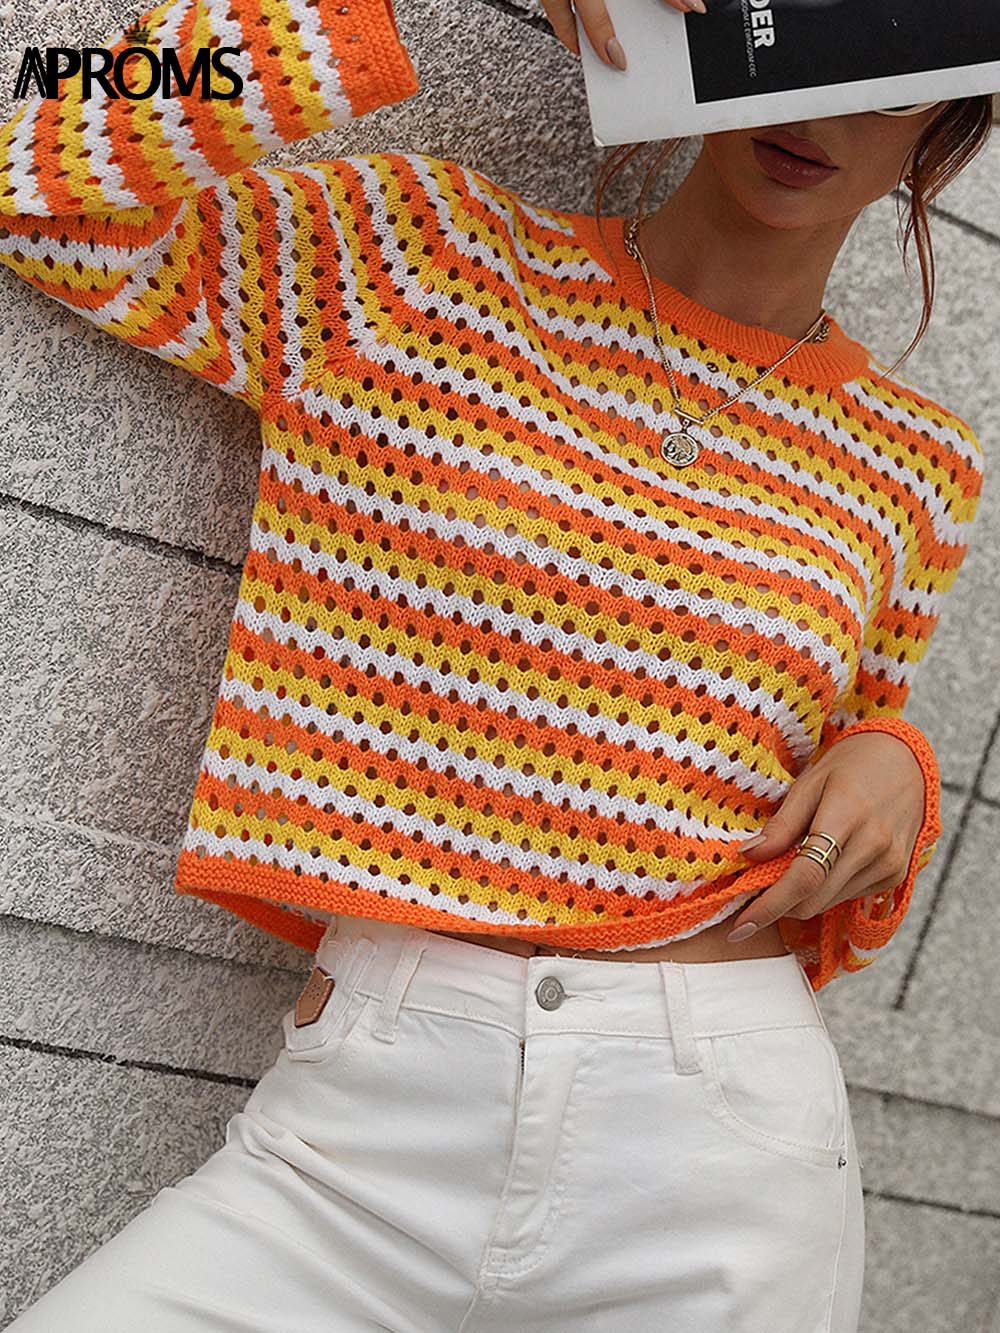 Aproms-Multi-Striped-Knit-Crochet-Sweater-and-Pullover-Vintage-Hollow-Out-Jumpers-90s-Cool-Girls-Long-4